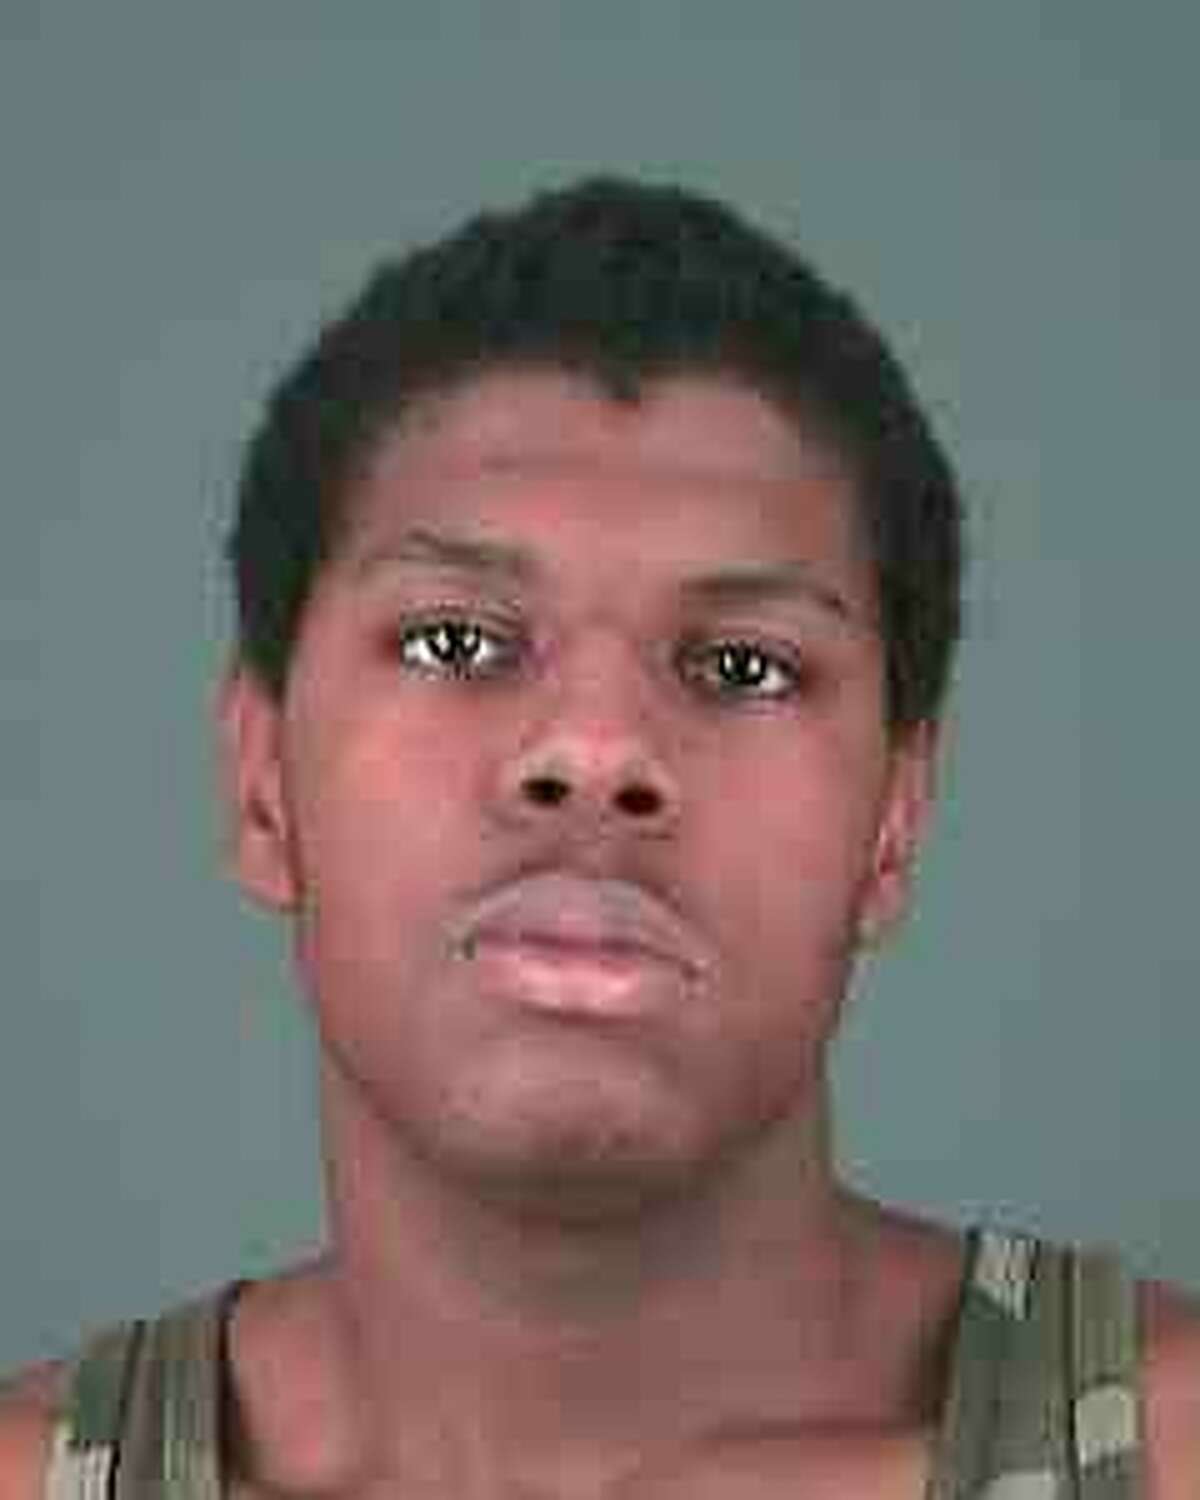 Jaquan Rollin (Albany police photo)